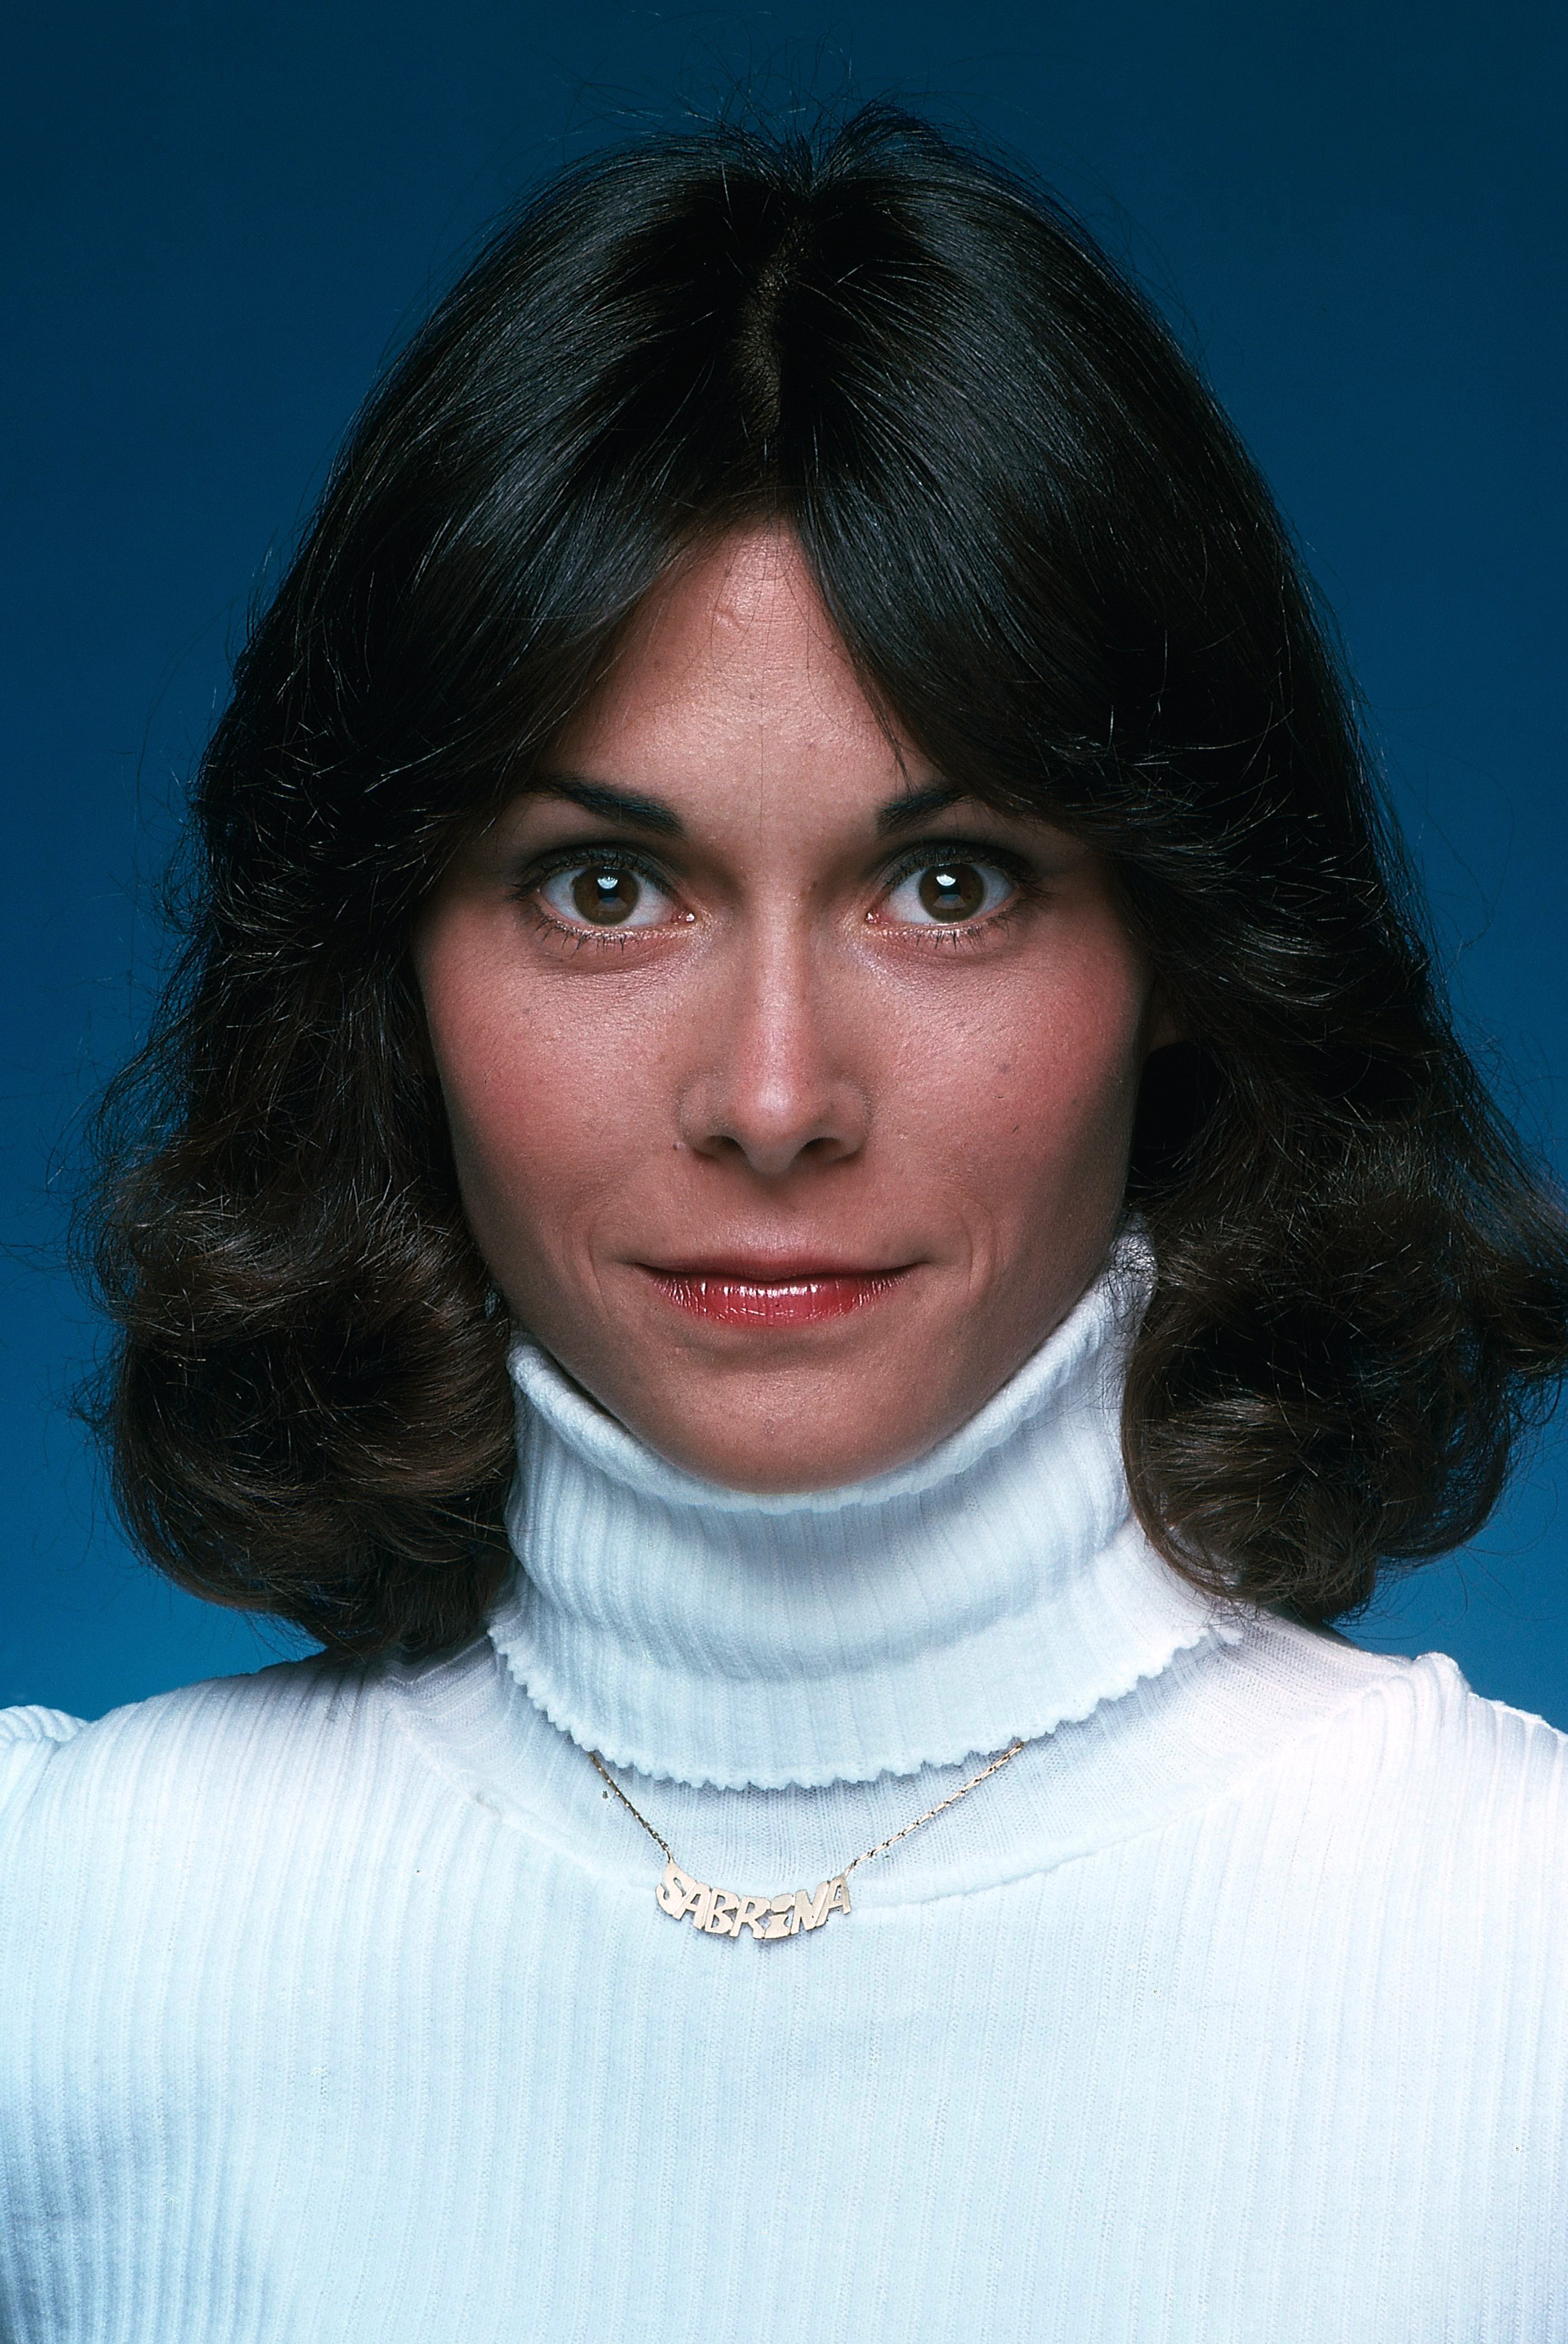 Kate Jackson photographed in 1976 | Source: Getty Images